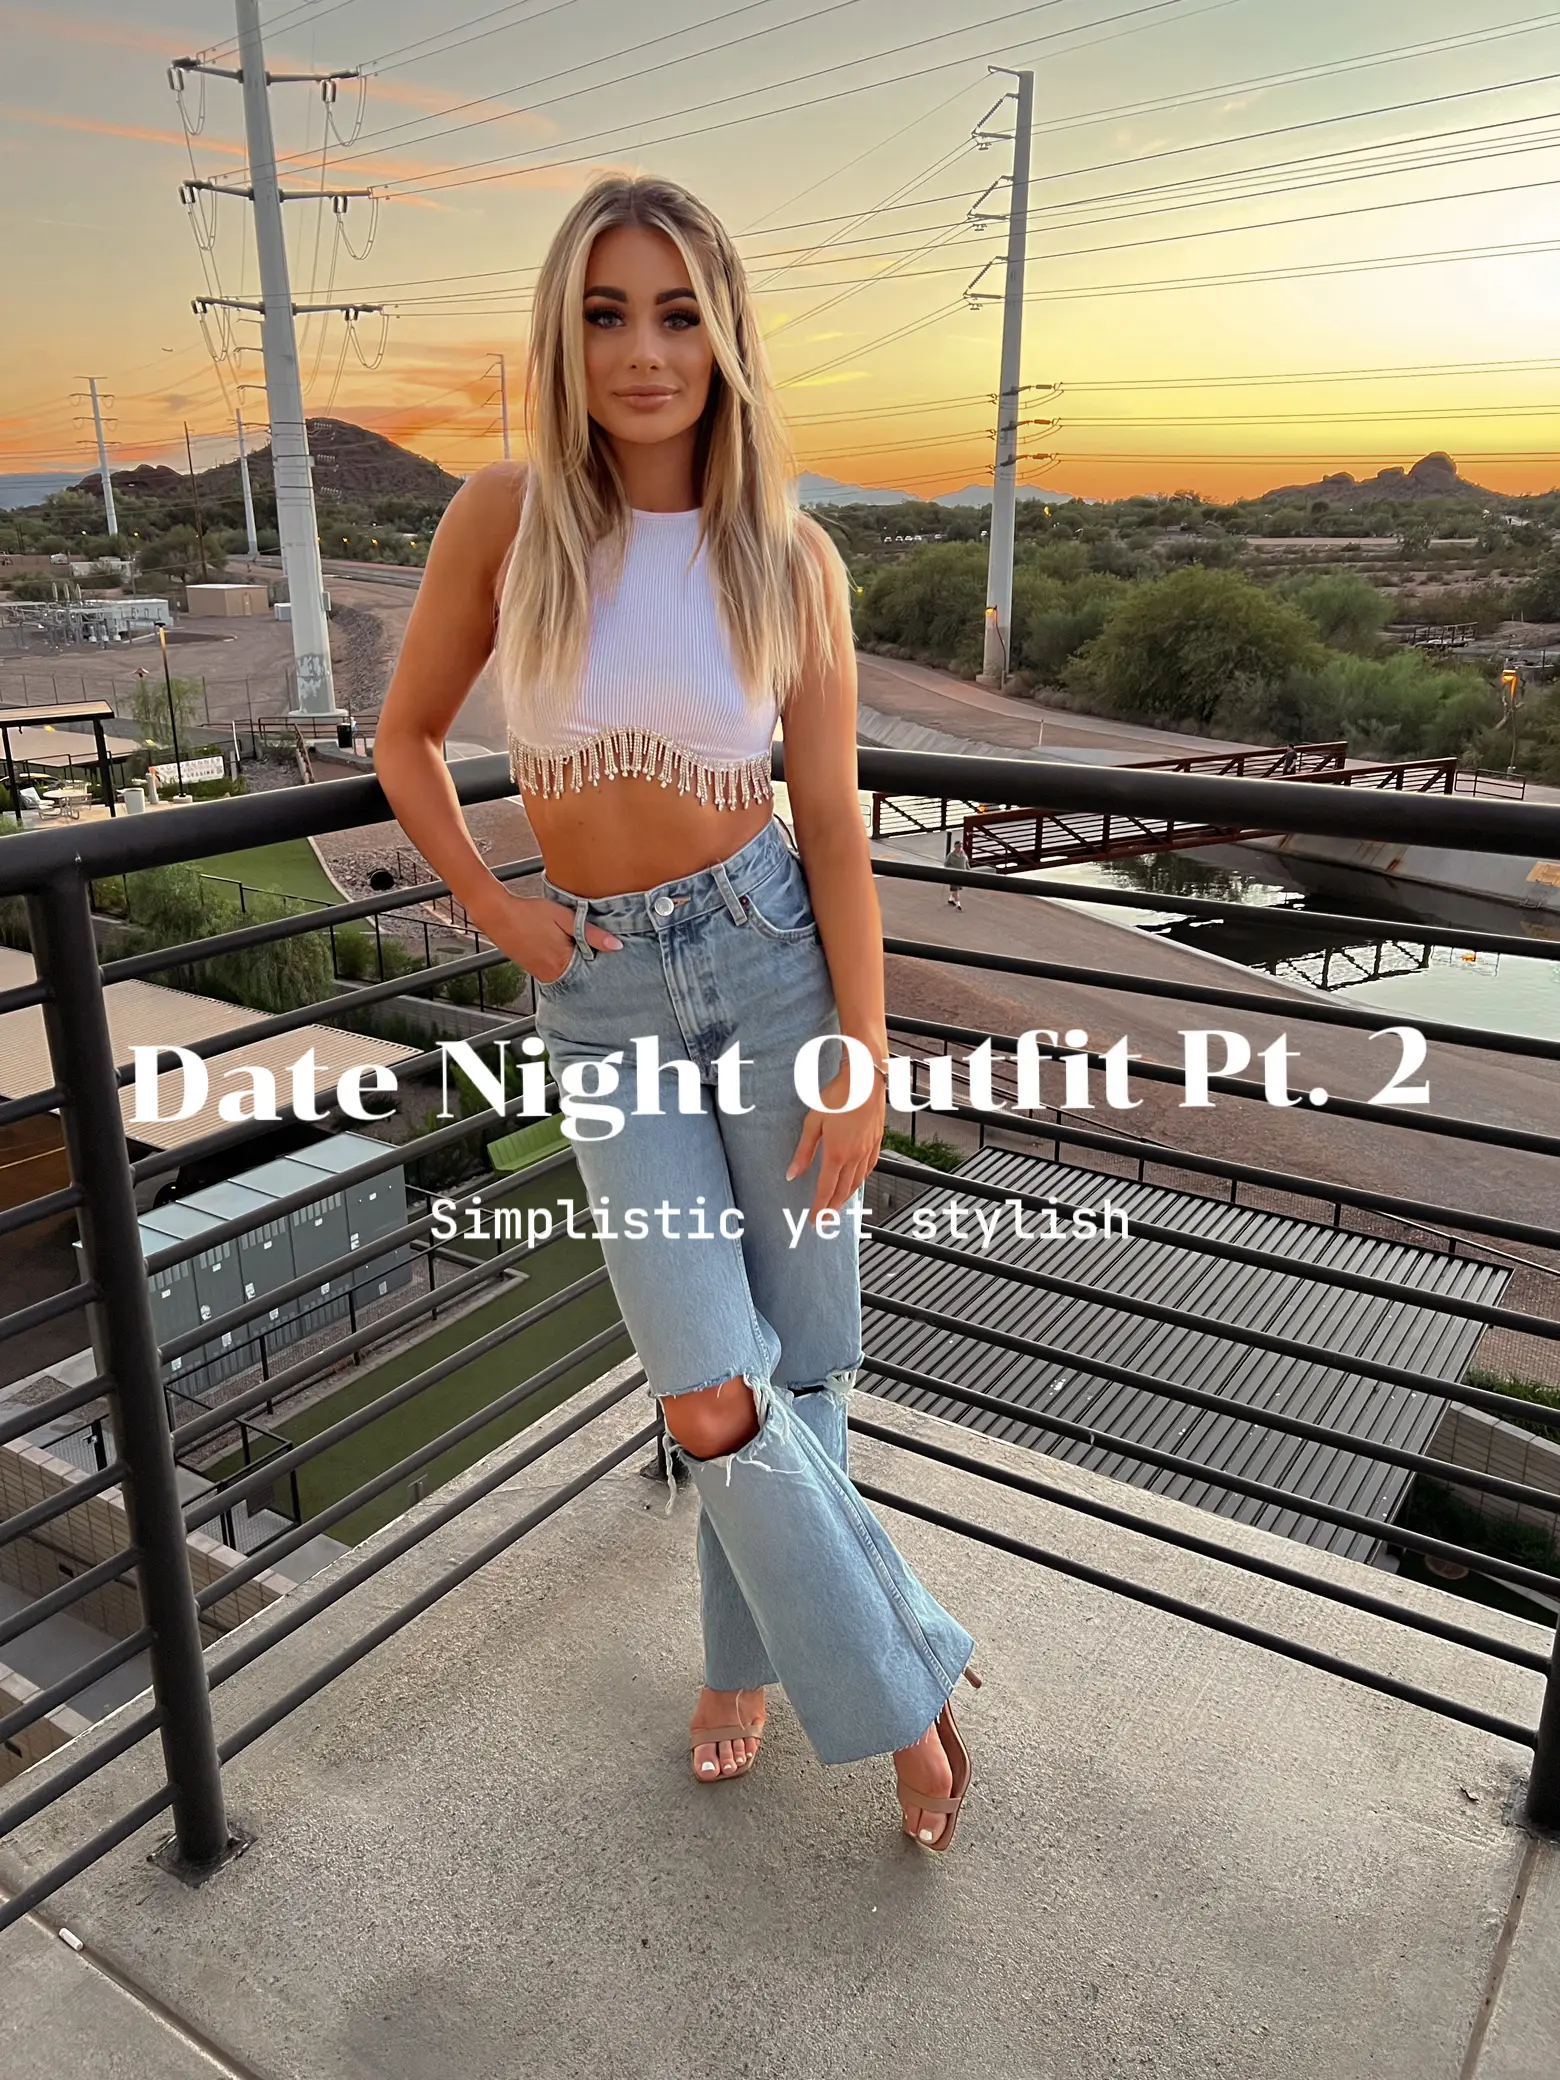 The perfect date night outfit #datenightoutfit #outfitinspo